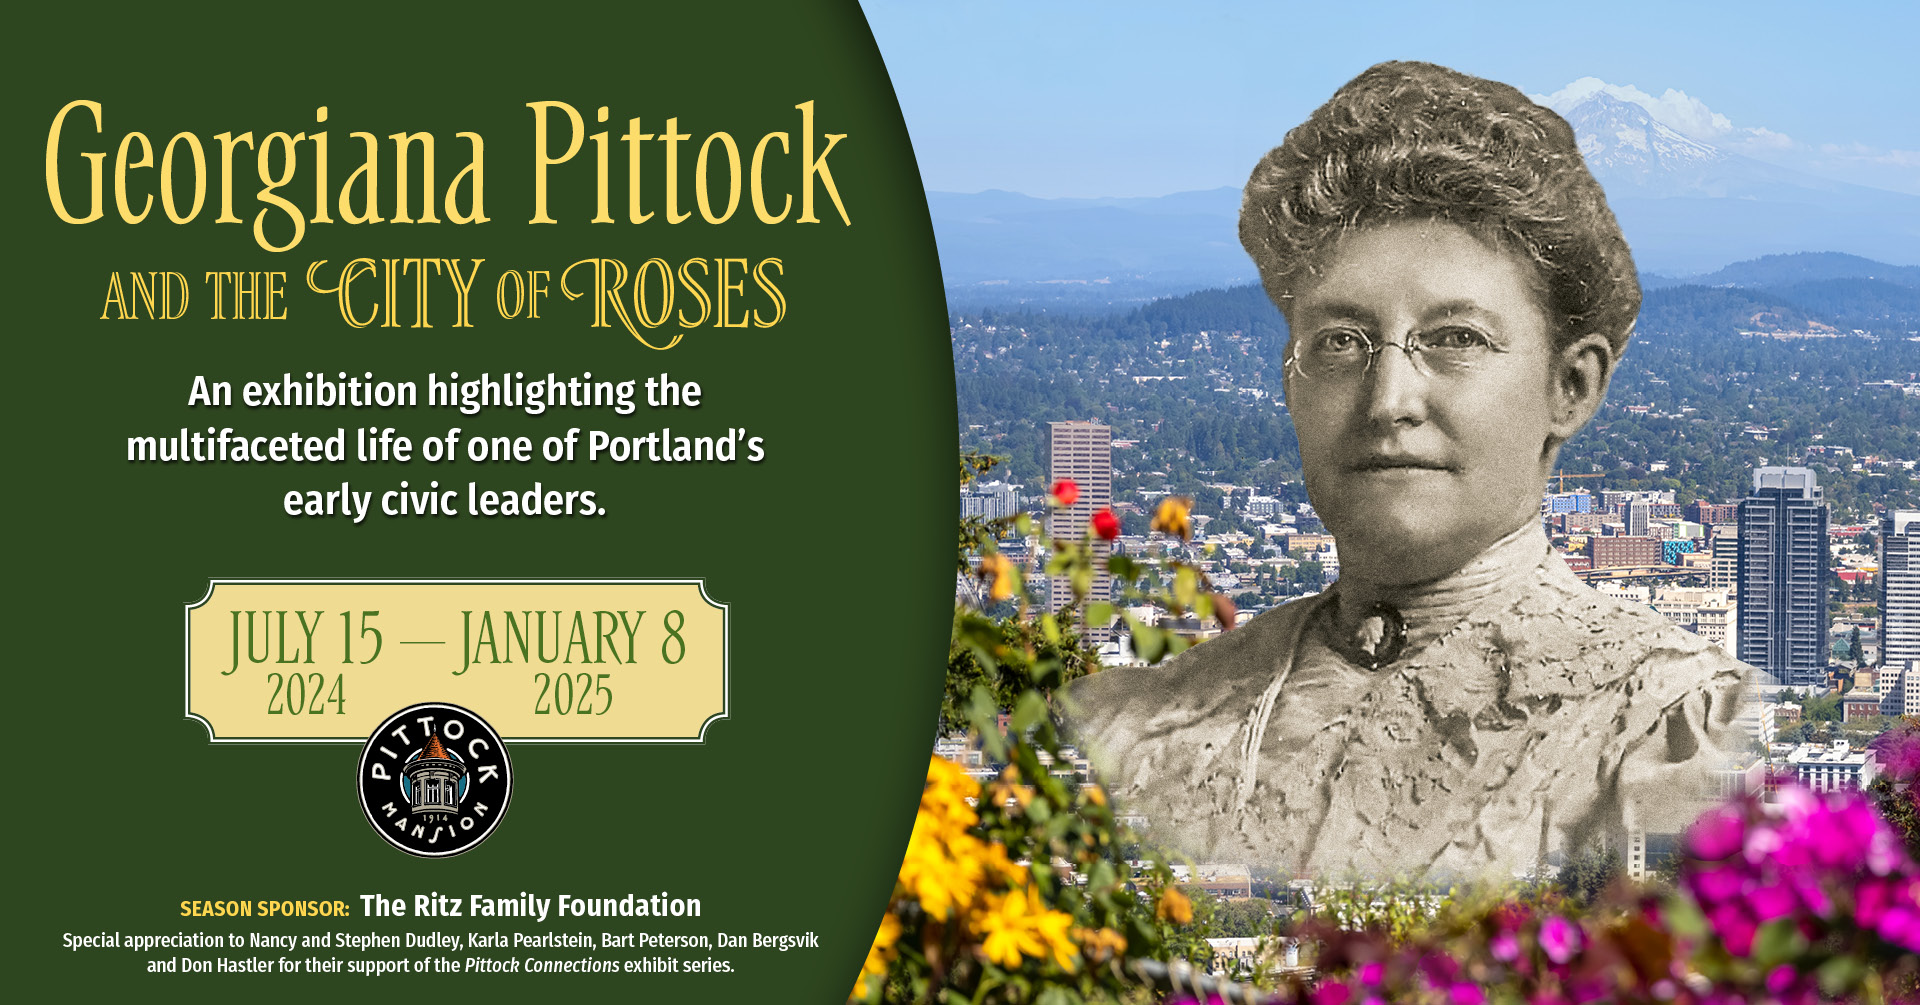 Georgiana Pittock and the City of Roses - new exhibit at Pittock Mansion in Portland, Oregon.